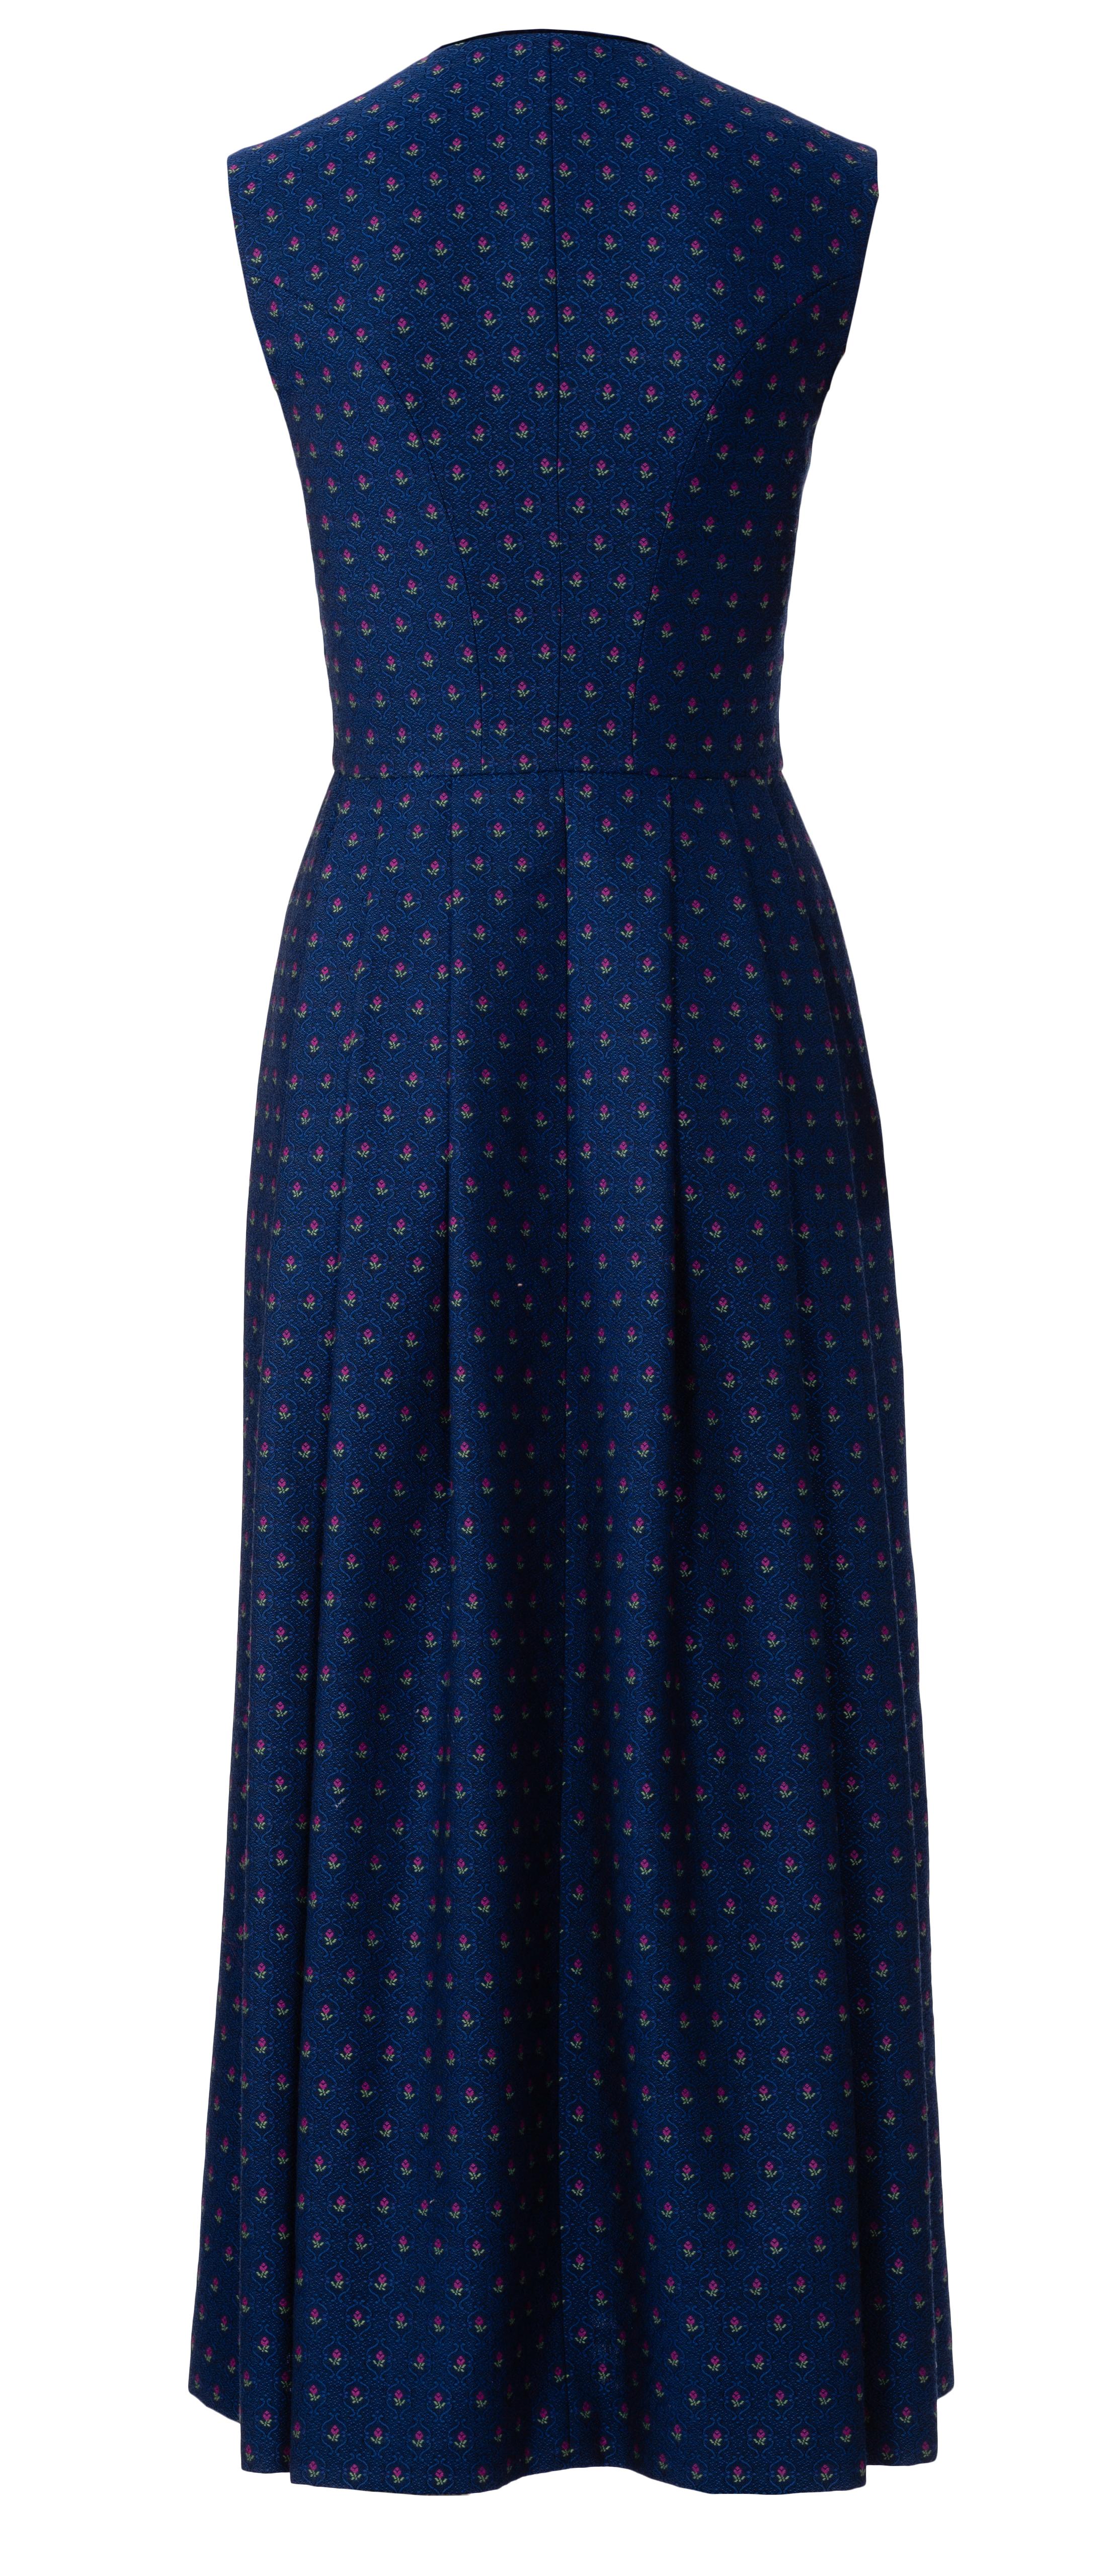 Burda 6268 Misses' pinafore Dress in Dirndl-Style, Blouse and Apron